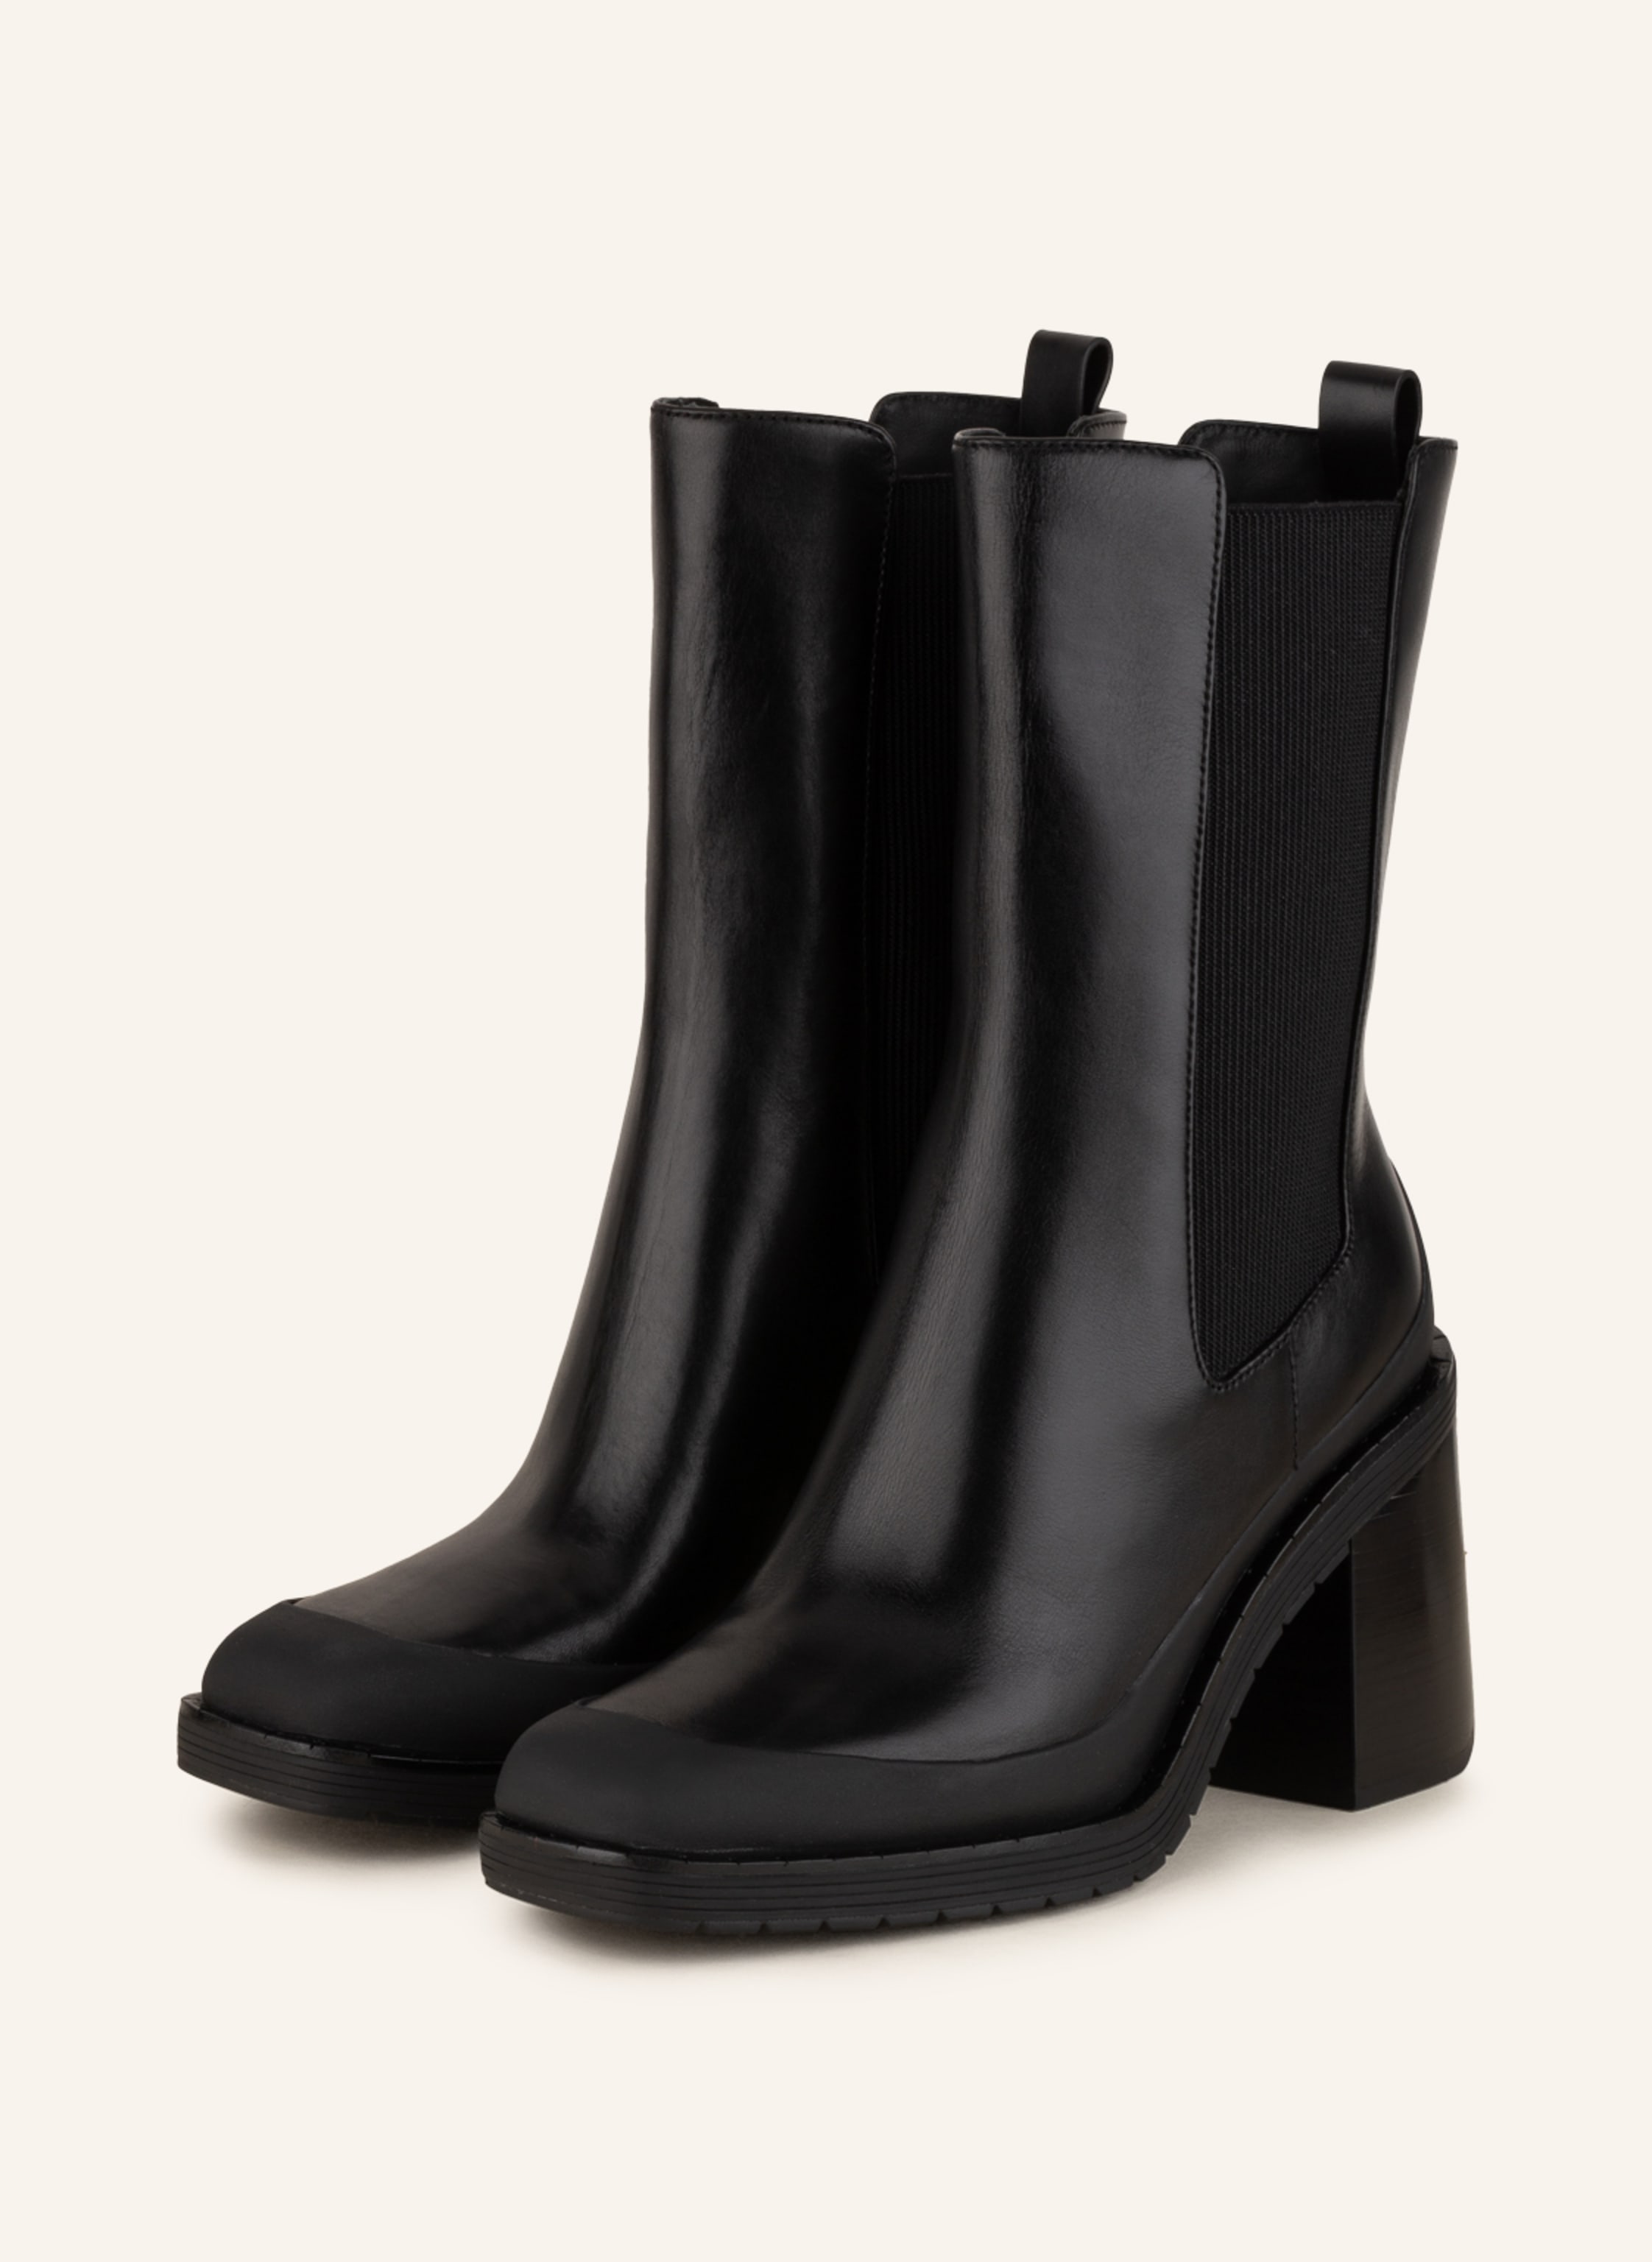 TORY BURCH boots EXPEDITION in black | Breuninger